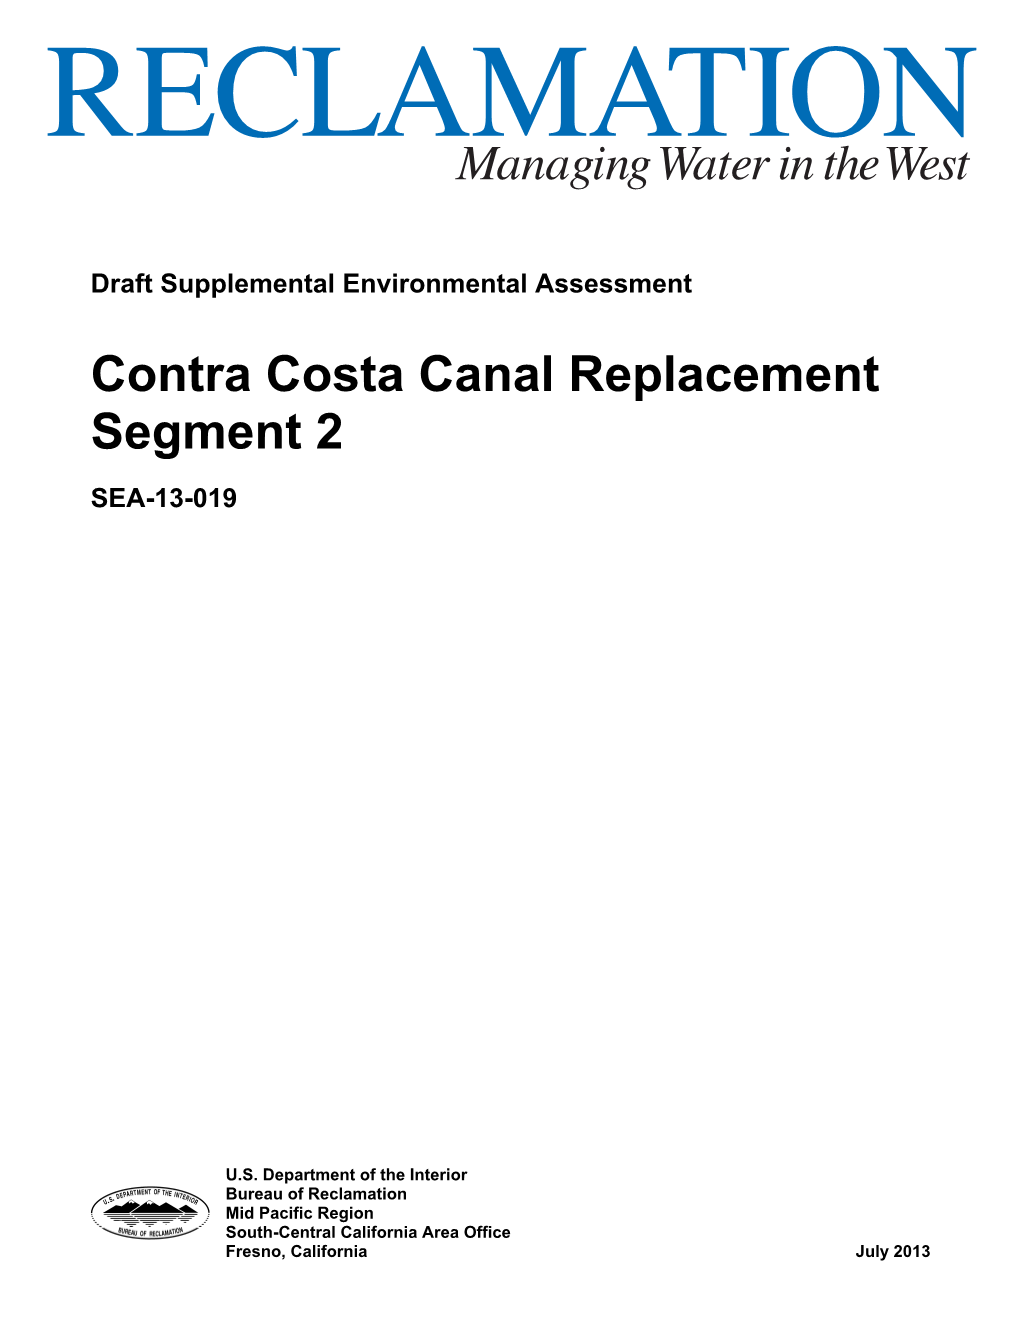 Contra Costa Canal Replacement Segment 2